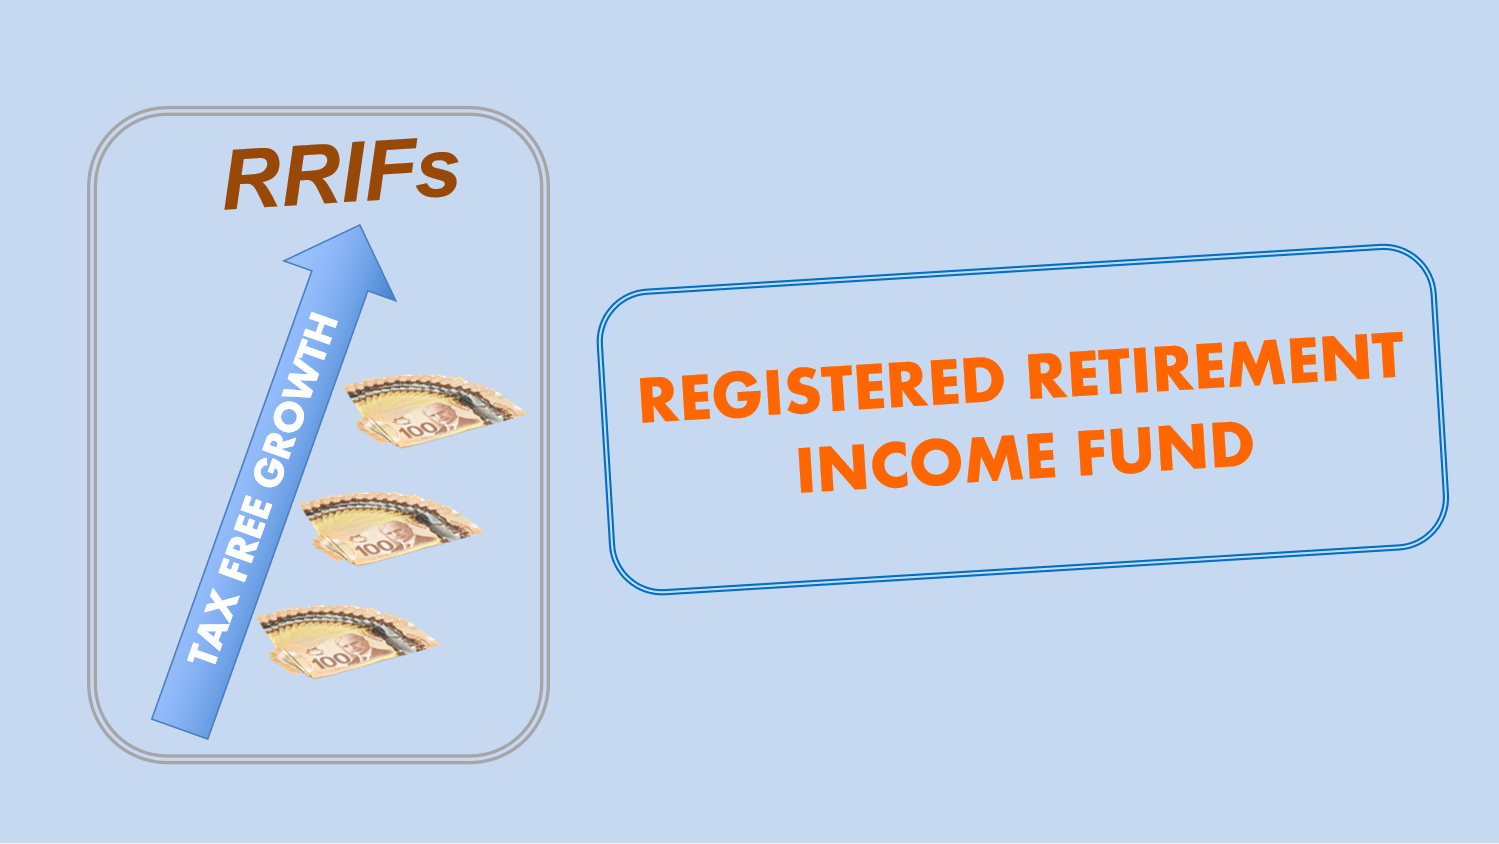 RRIFs: REGISTERED RETIREMENT INCOME FUNDS